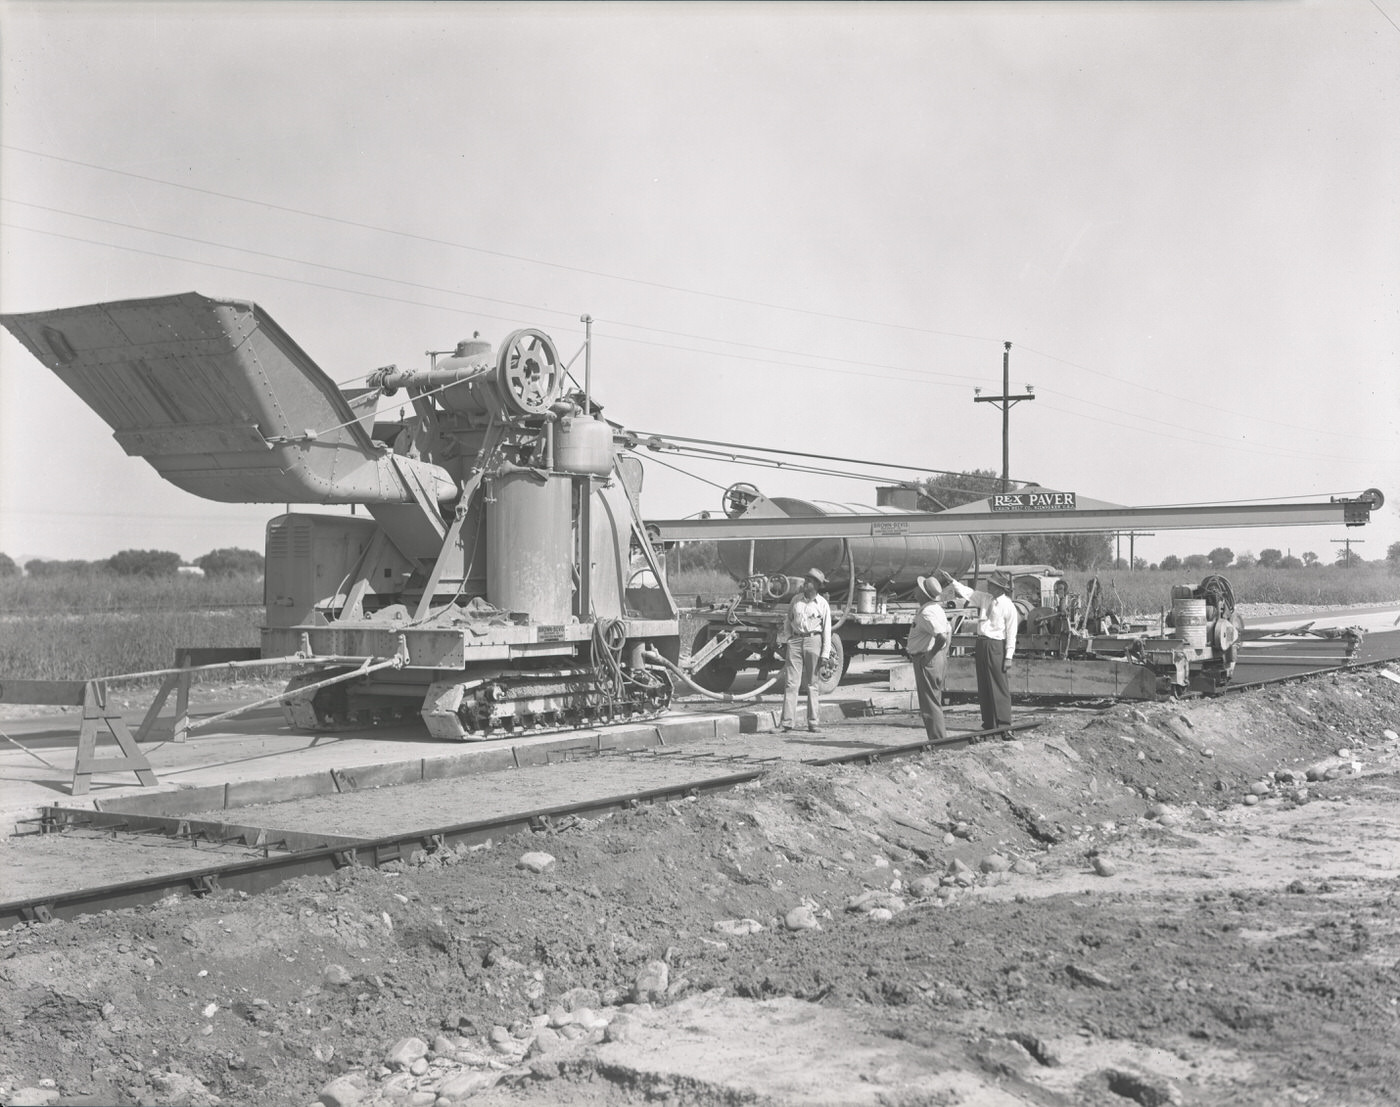 Brown-Bevis Equipment Co. Paving Machinery, 1930s